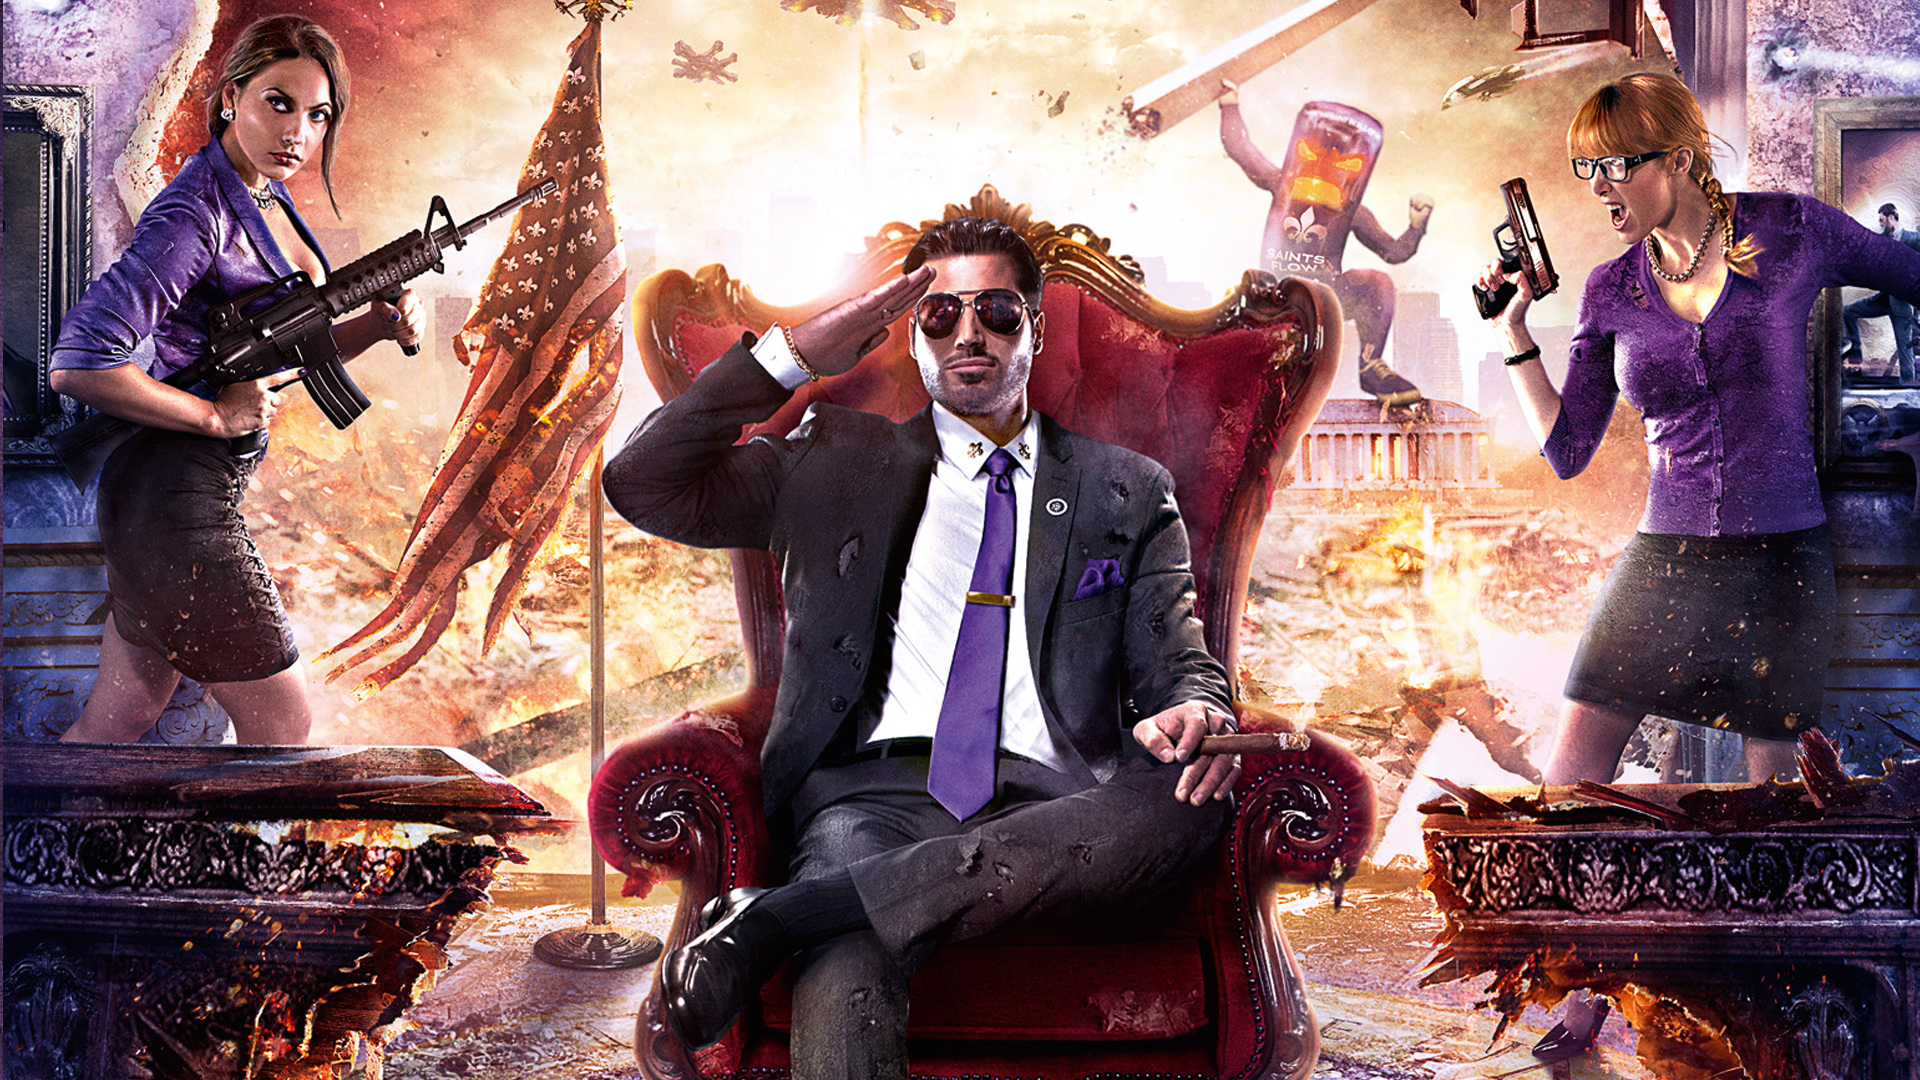 “Saints Row IV” Available Now on Xbox One’s Backwards Compatibility - With Still More to Come